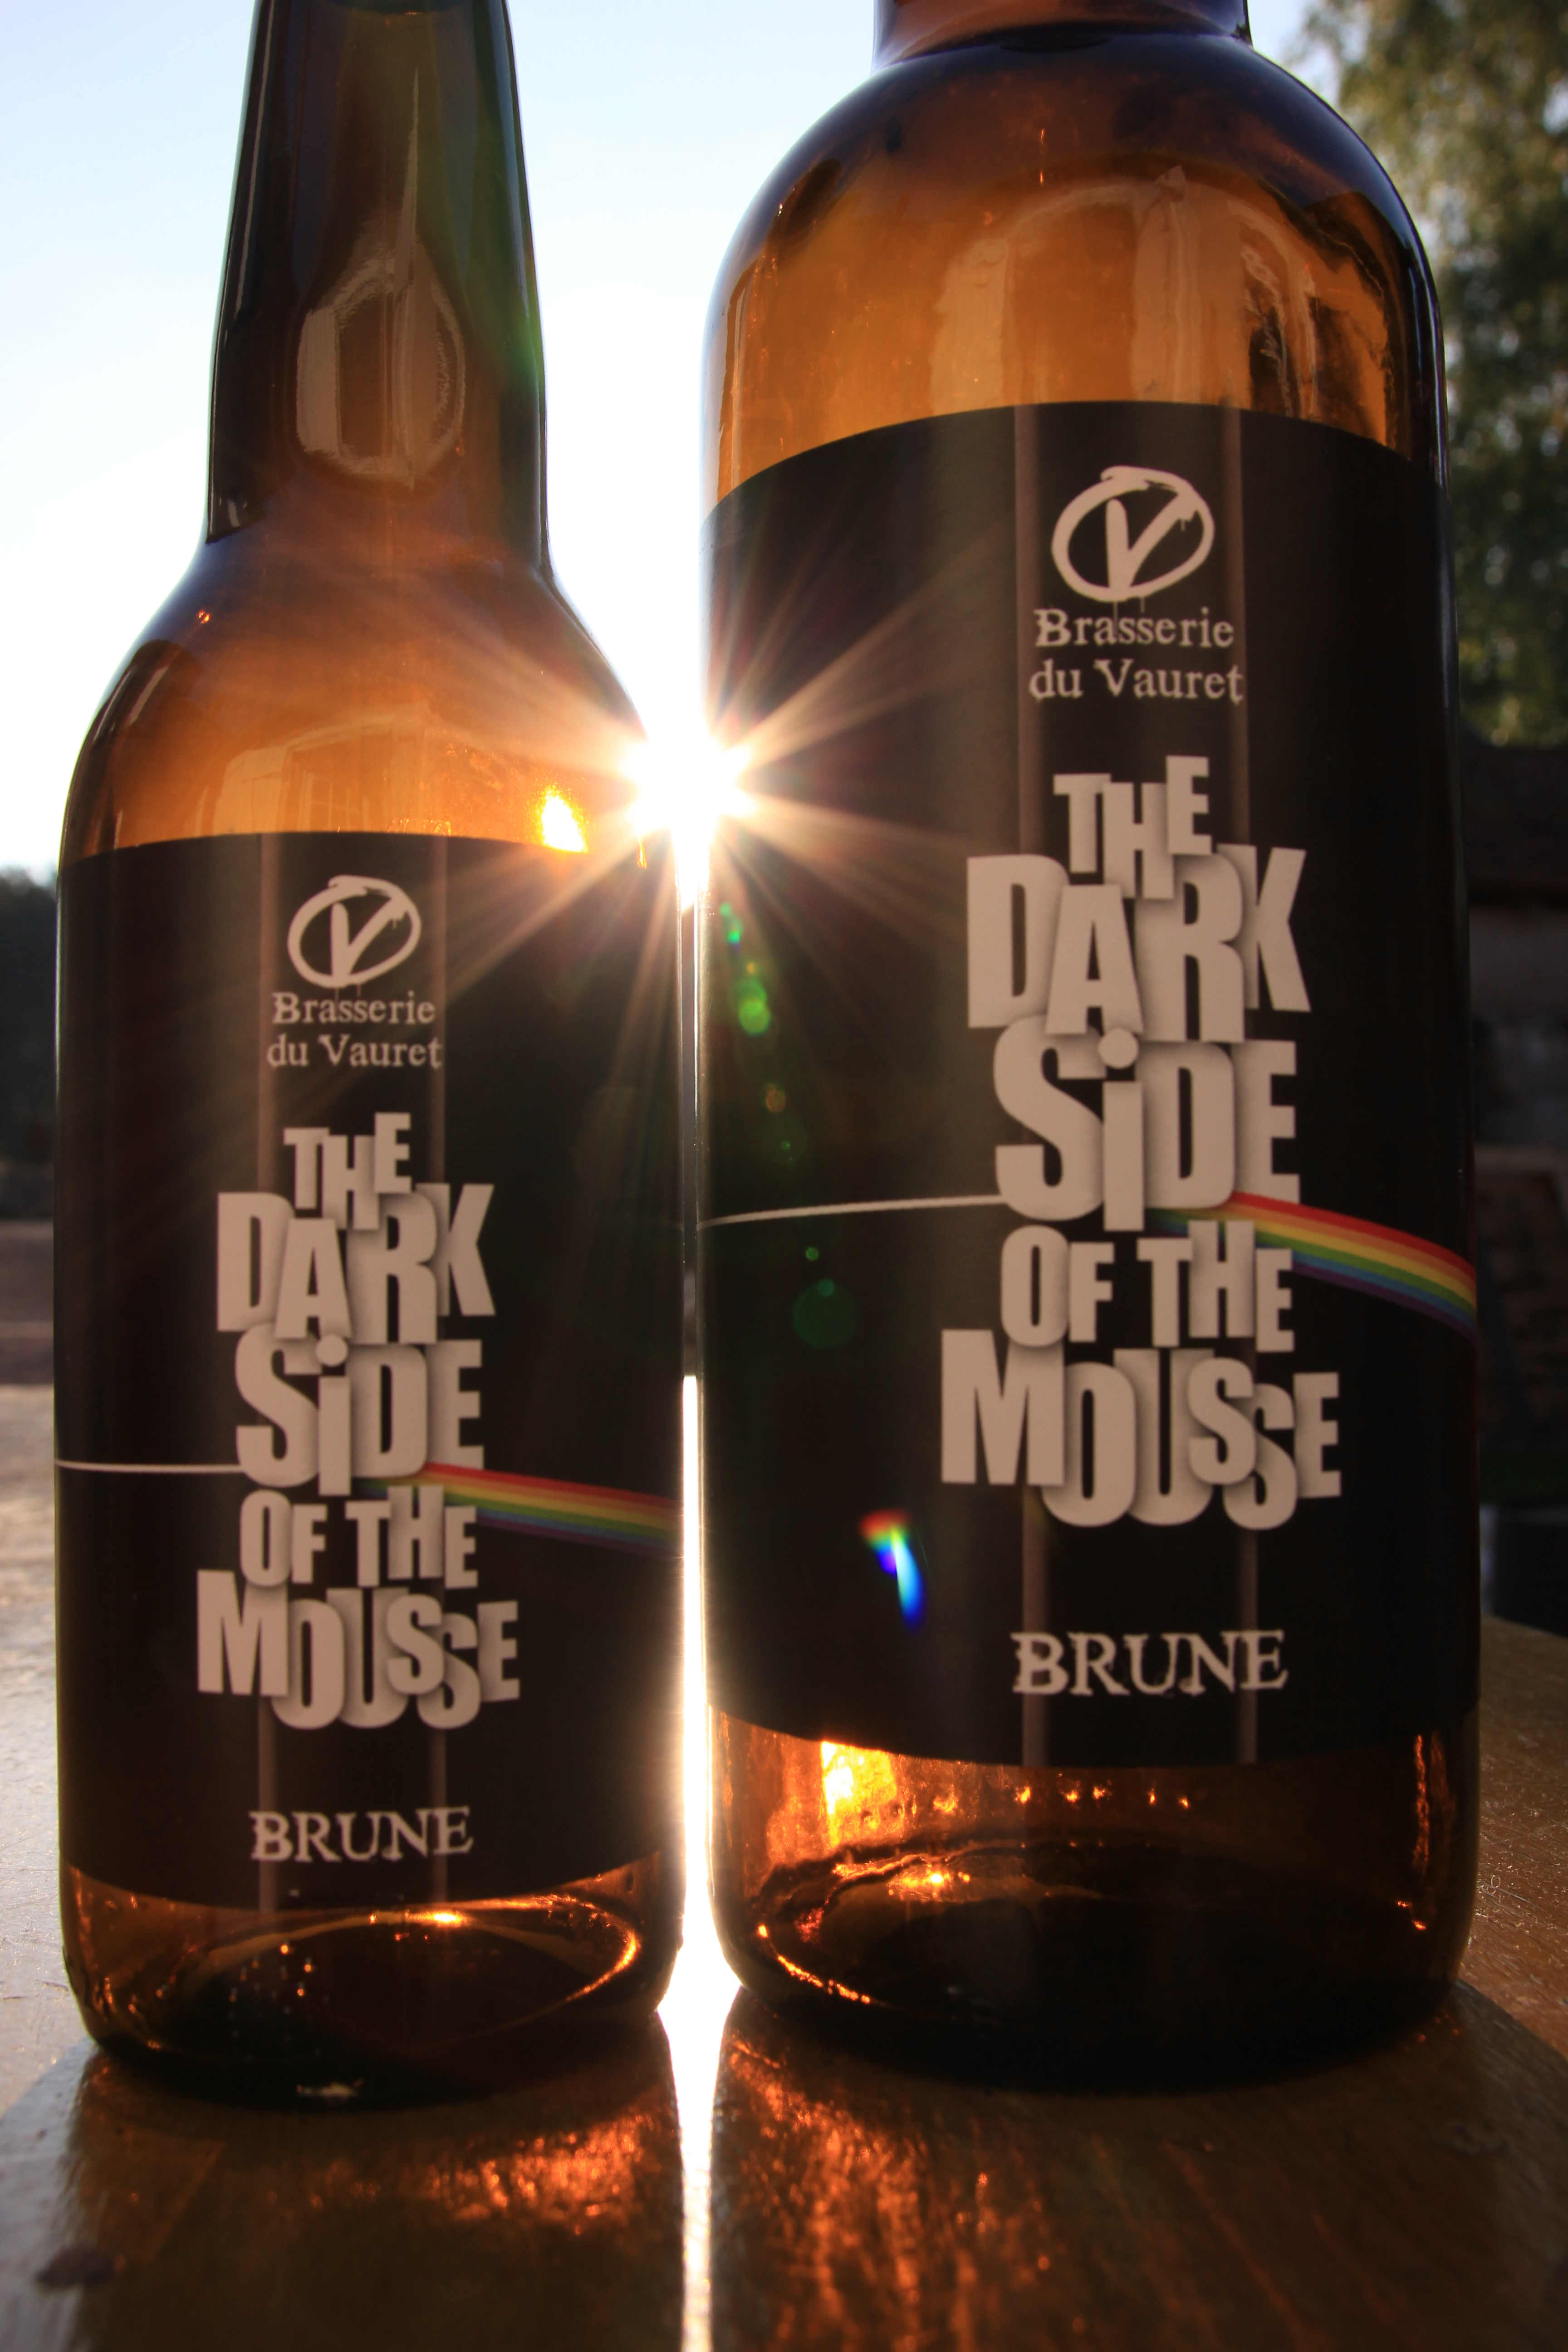 The Dark Side Of The Mousse